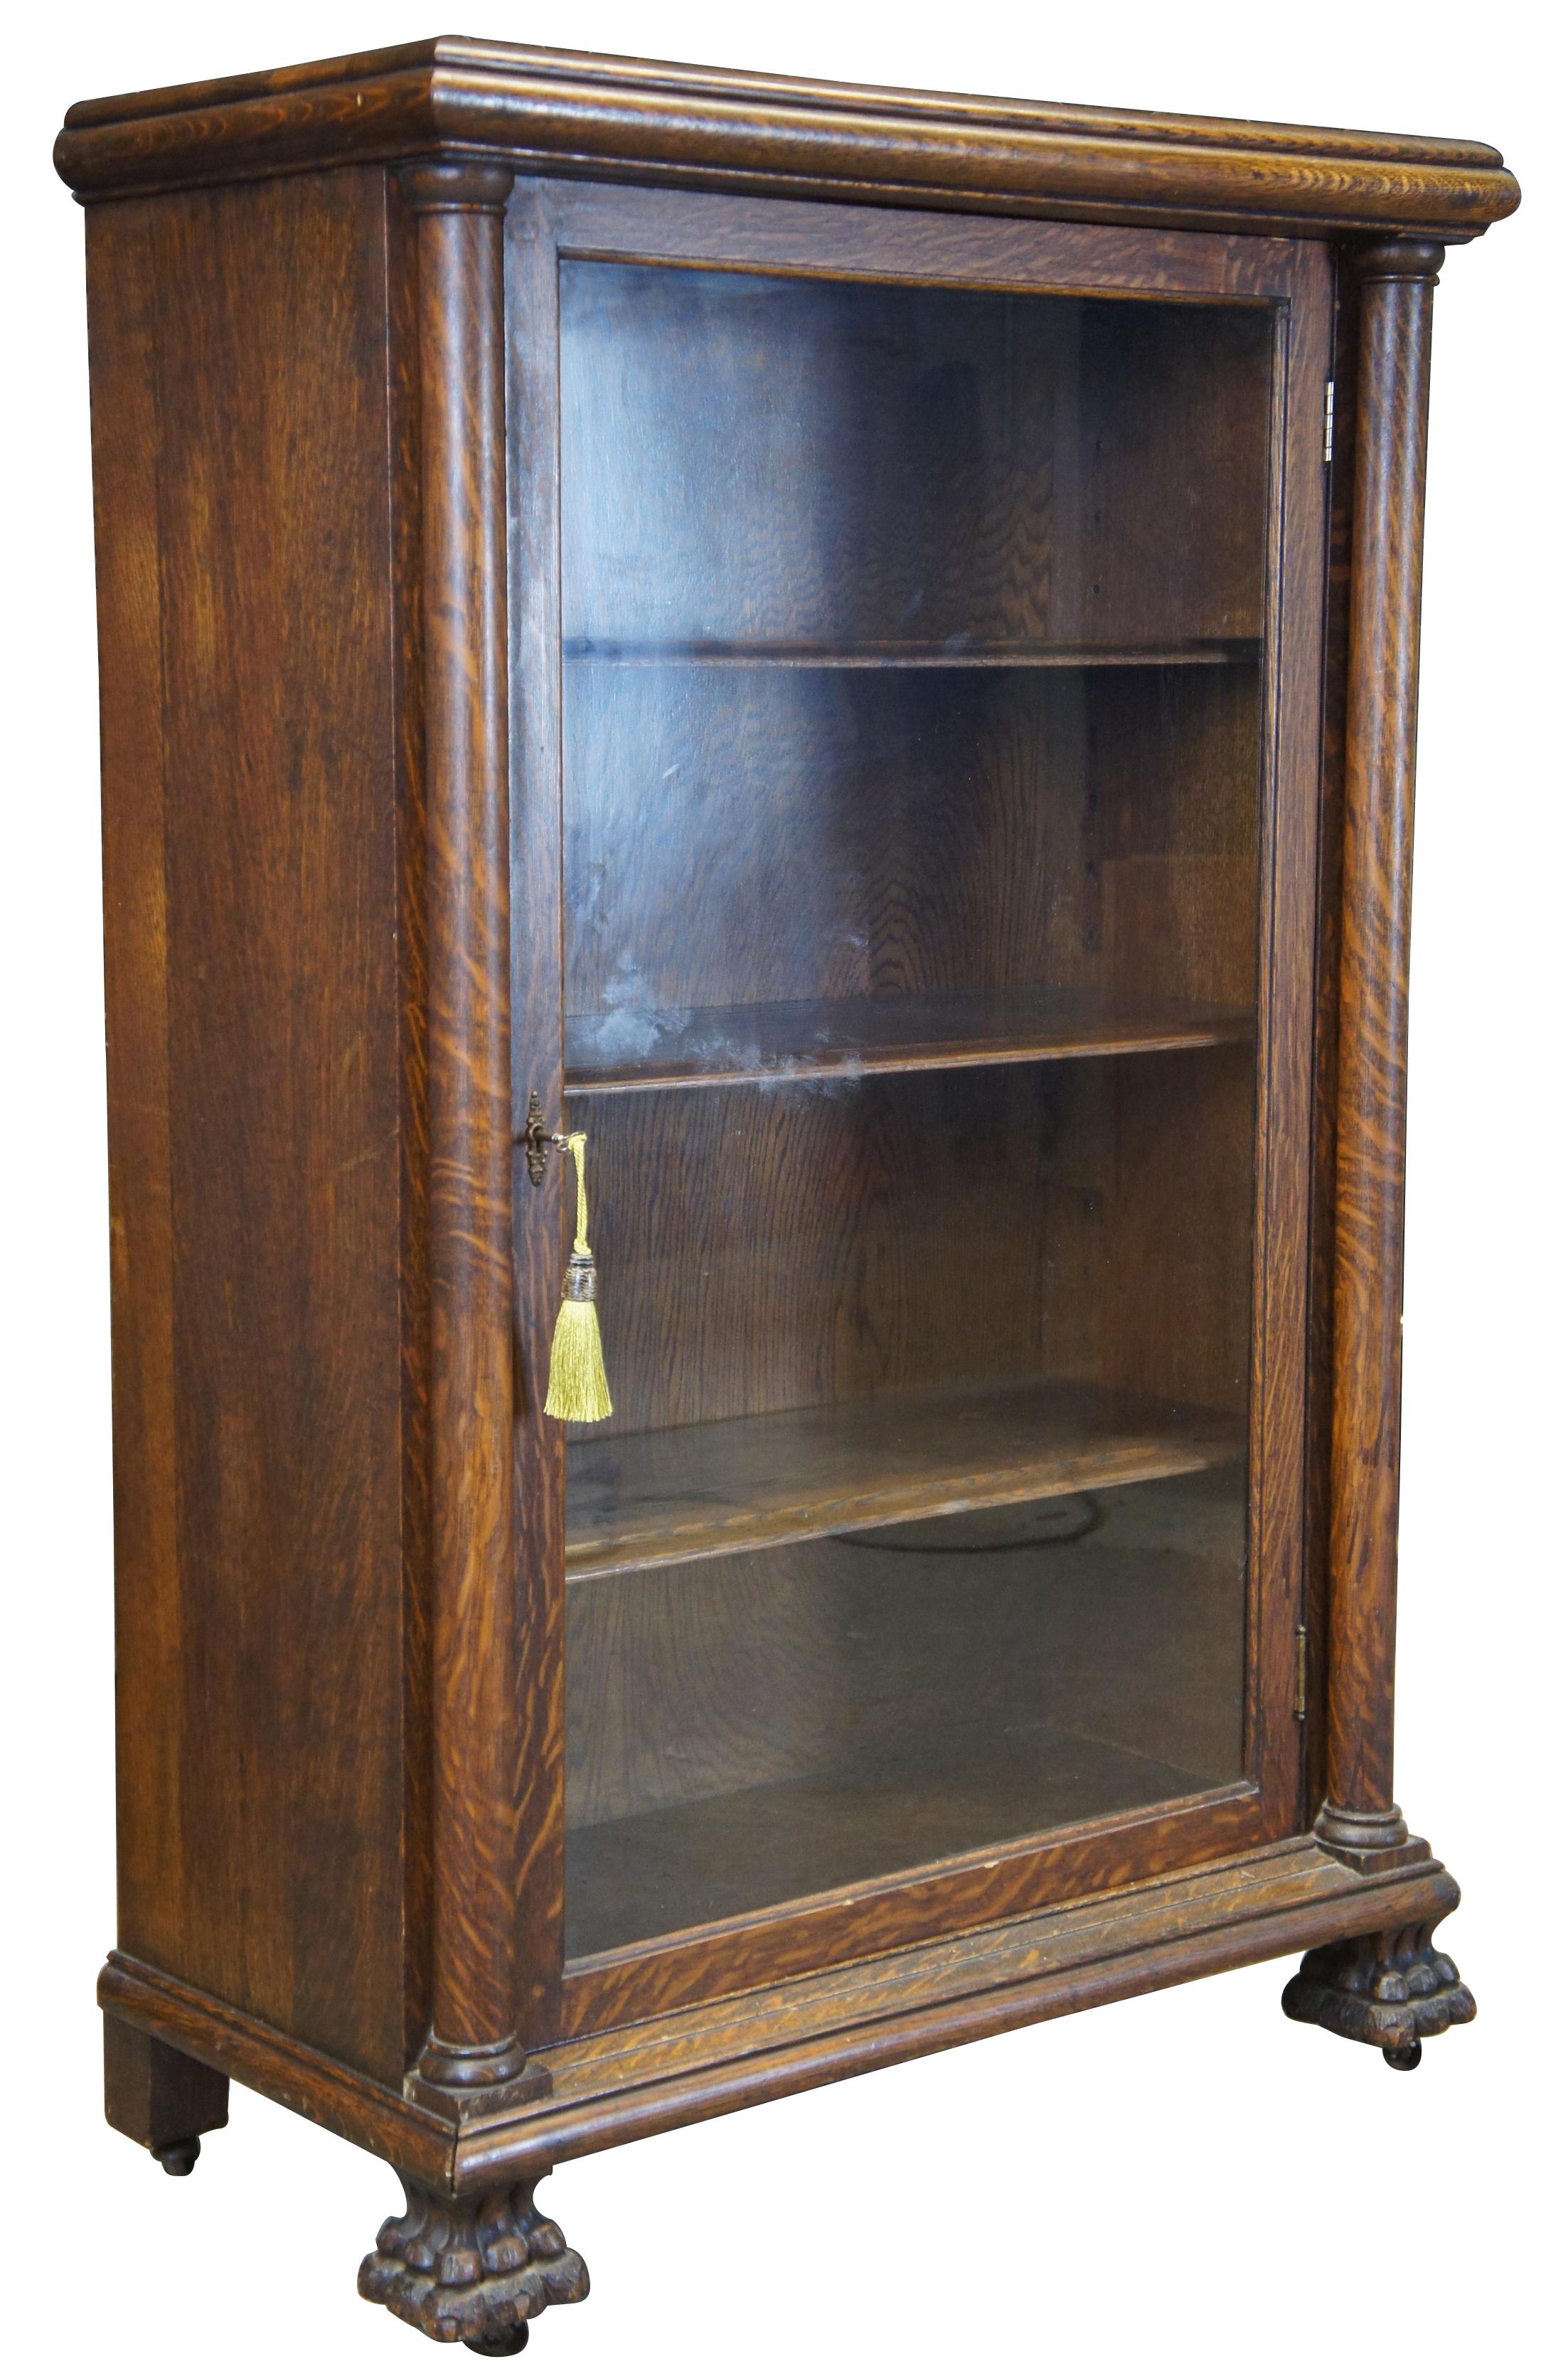 Turn of the 20th century American Empire display cabinet or bookcase. Made from quartersawn 